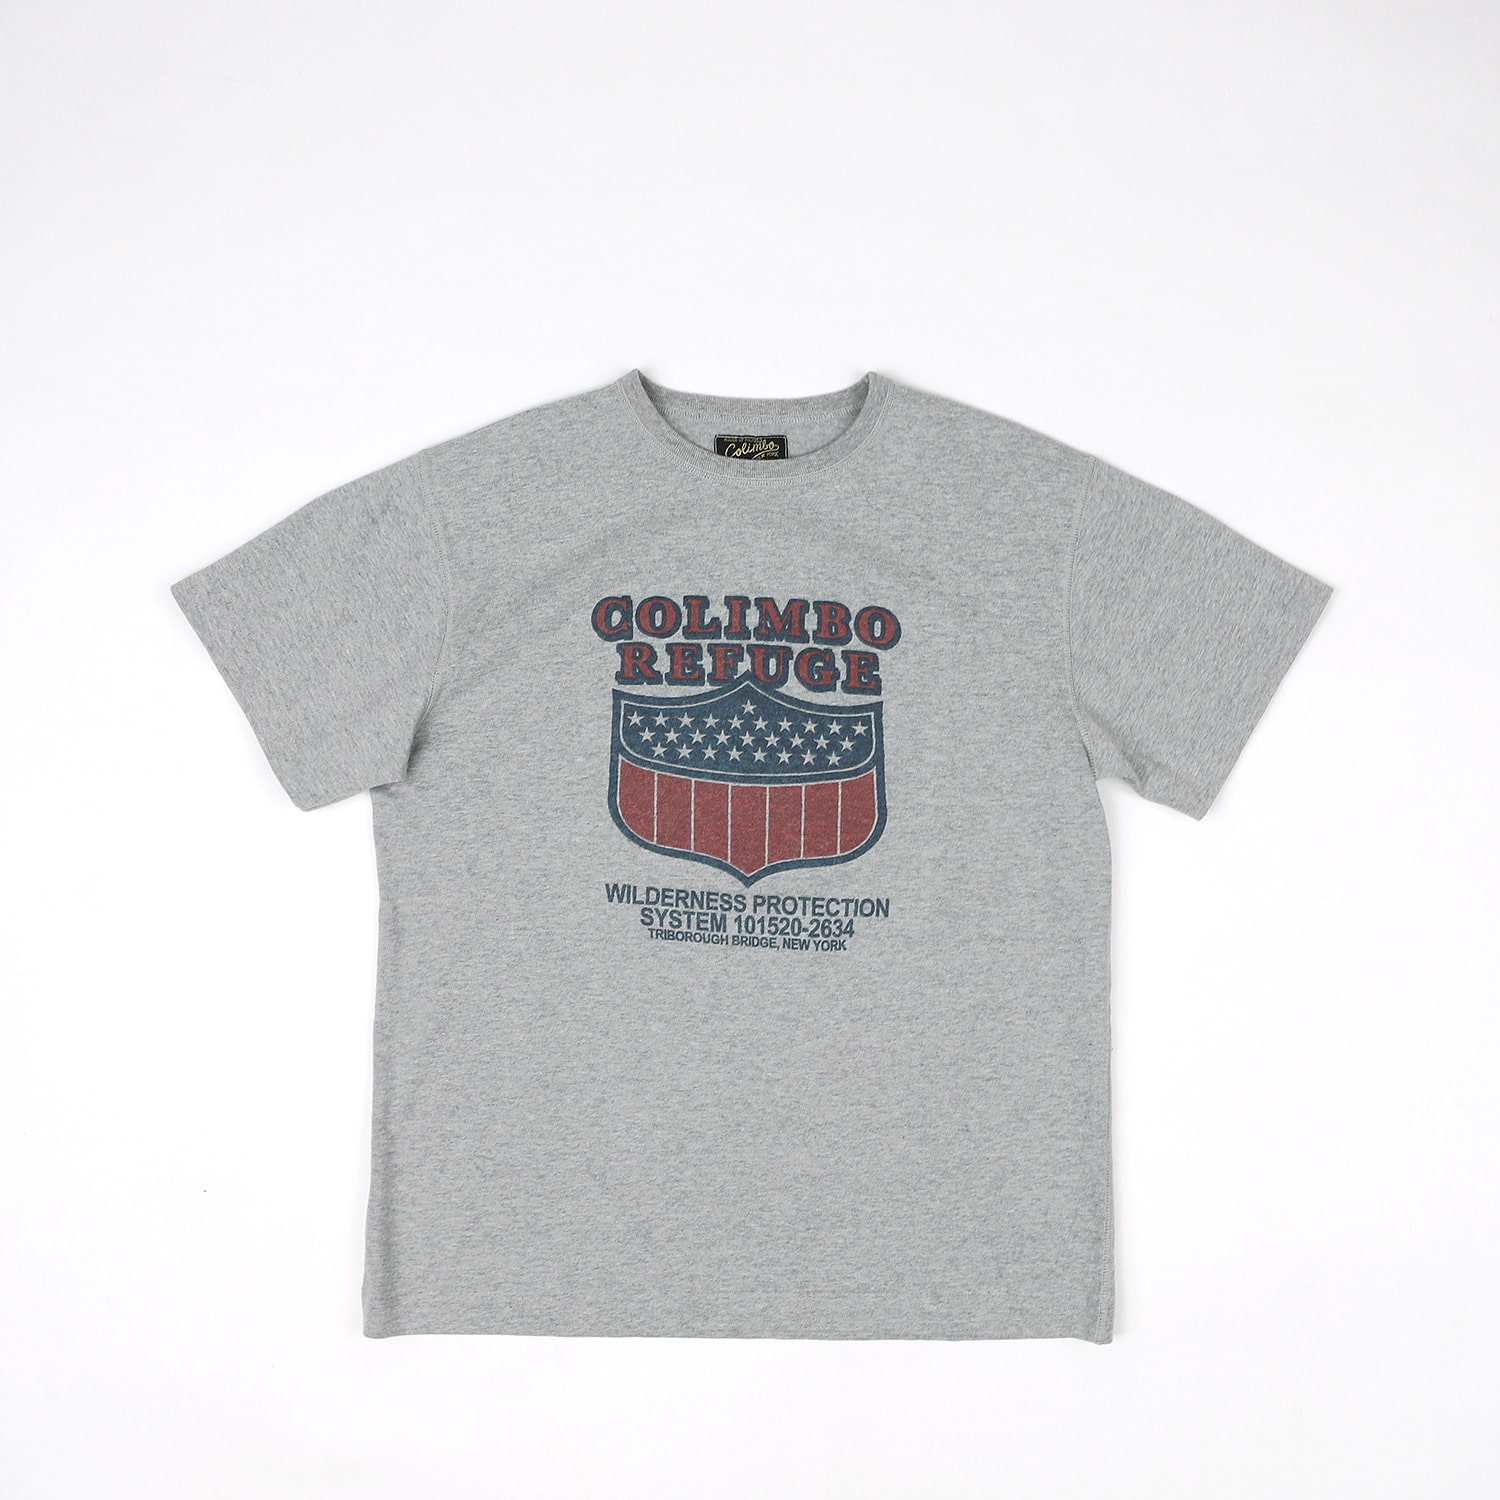 Heavy Weight Jersey3 Needle T-Shirt&quot;COLIMBO REFUGE&quot;(Gray)